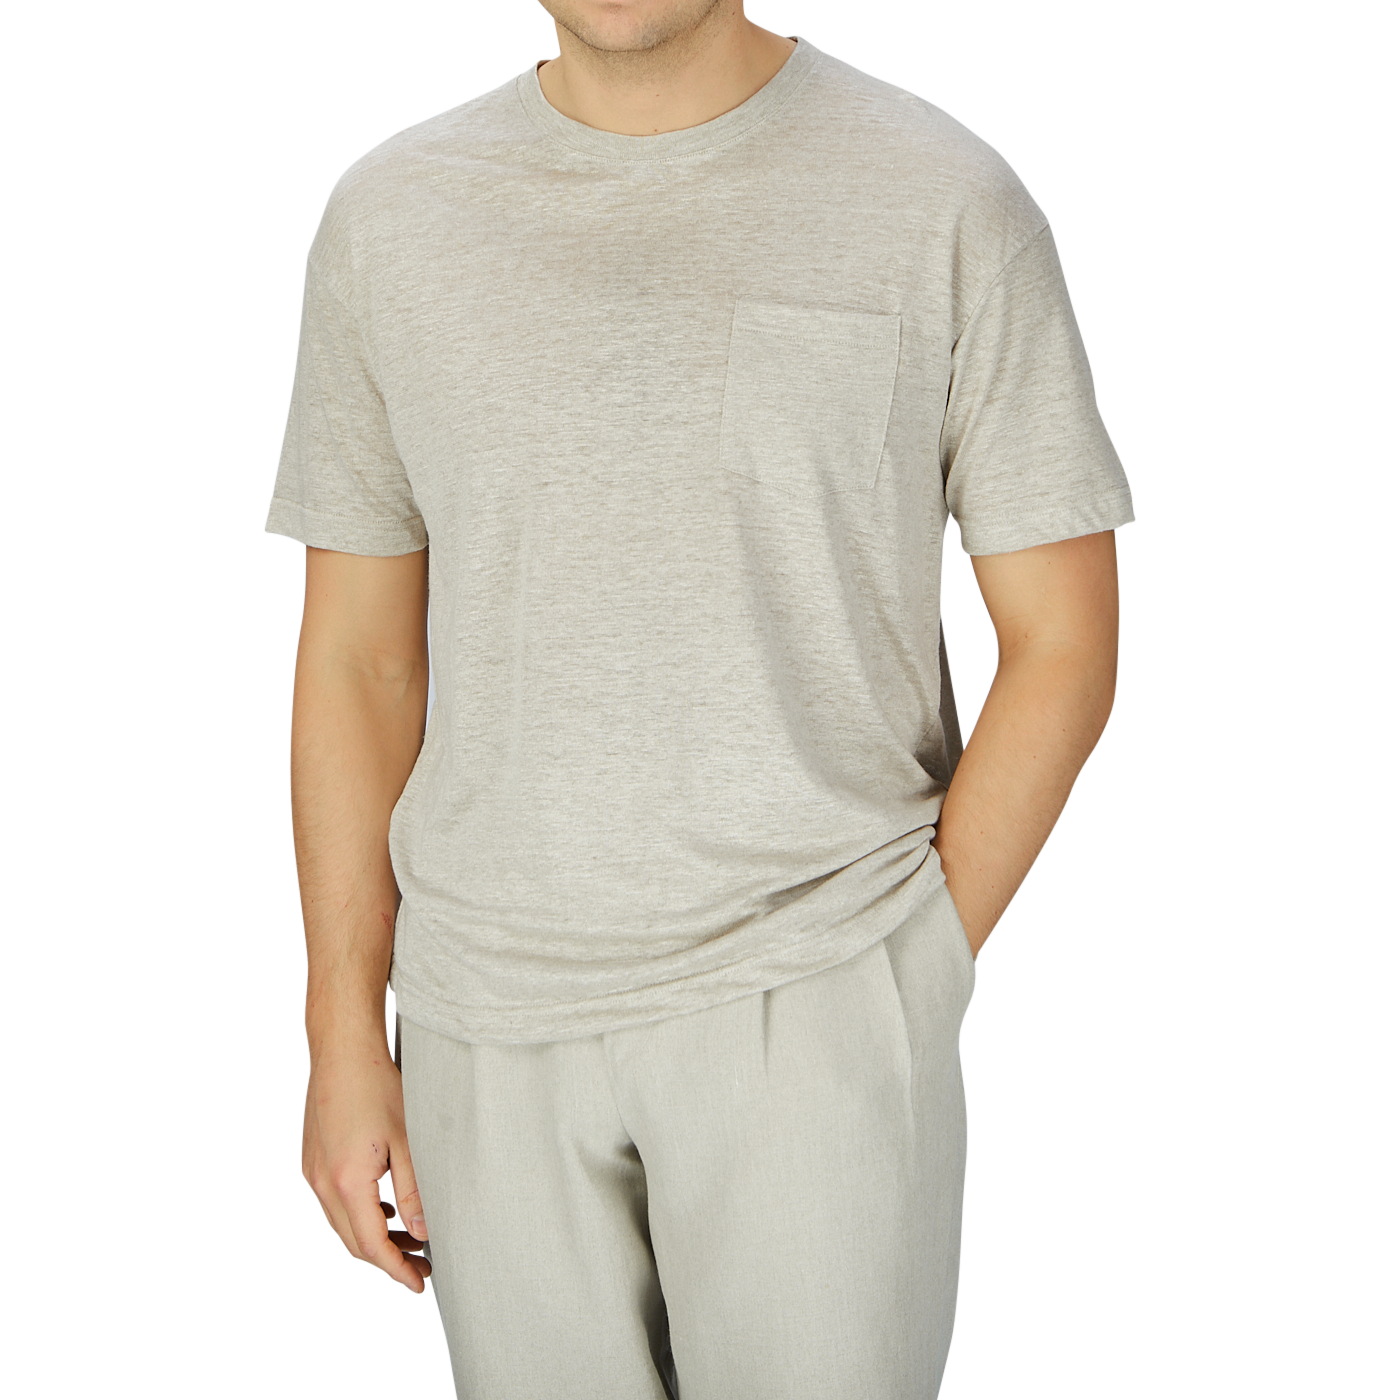 Man wearing an oversized Oatmeal Beige Linen Jersey T-shirt with a pocket and matching sweatpants by De Bonne Facture on a plain background.